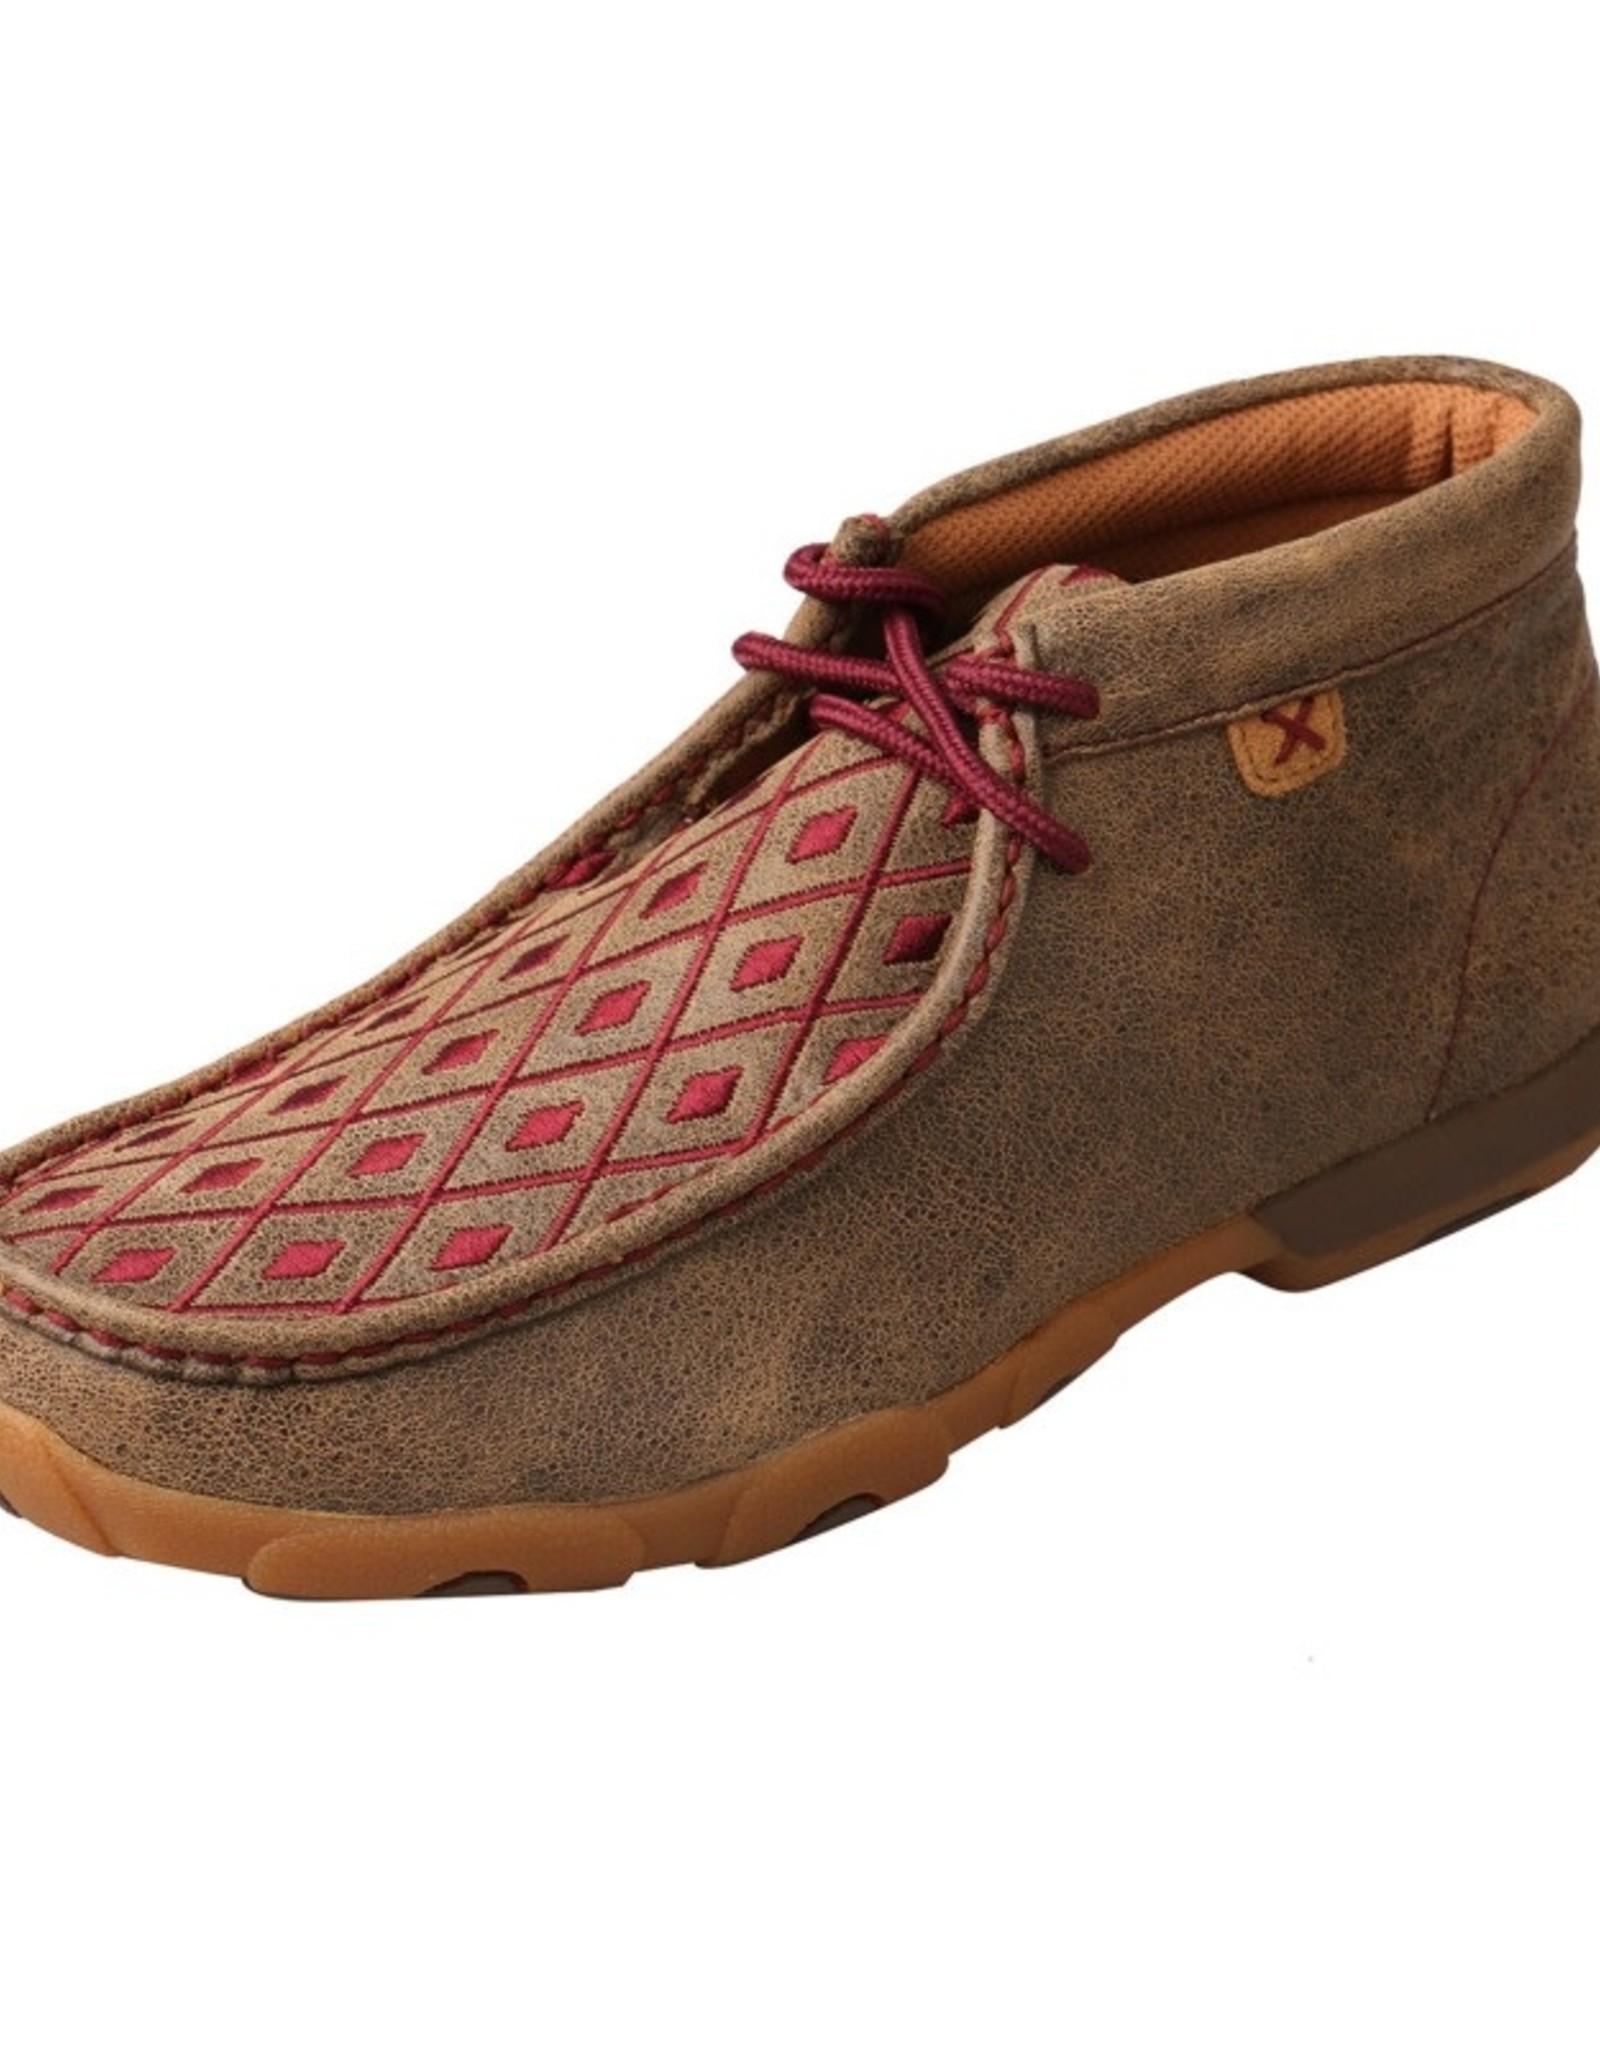 Womens Twisted X Chukka Driving Moc Brown Burgundy Embroidery